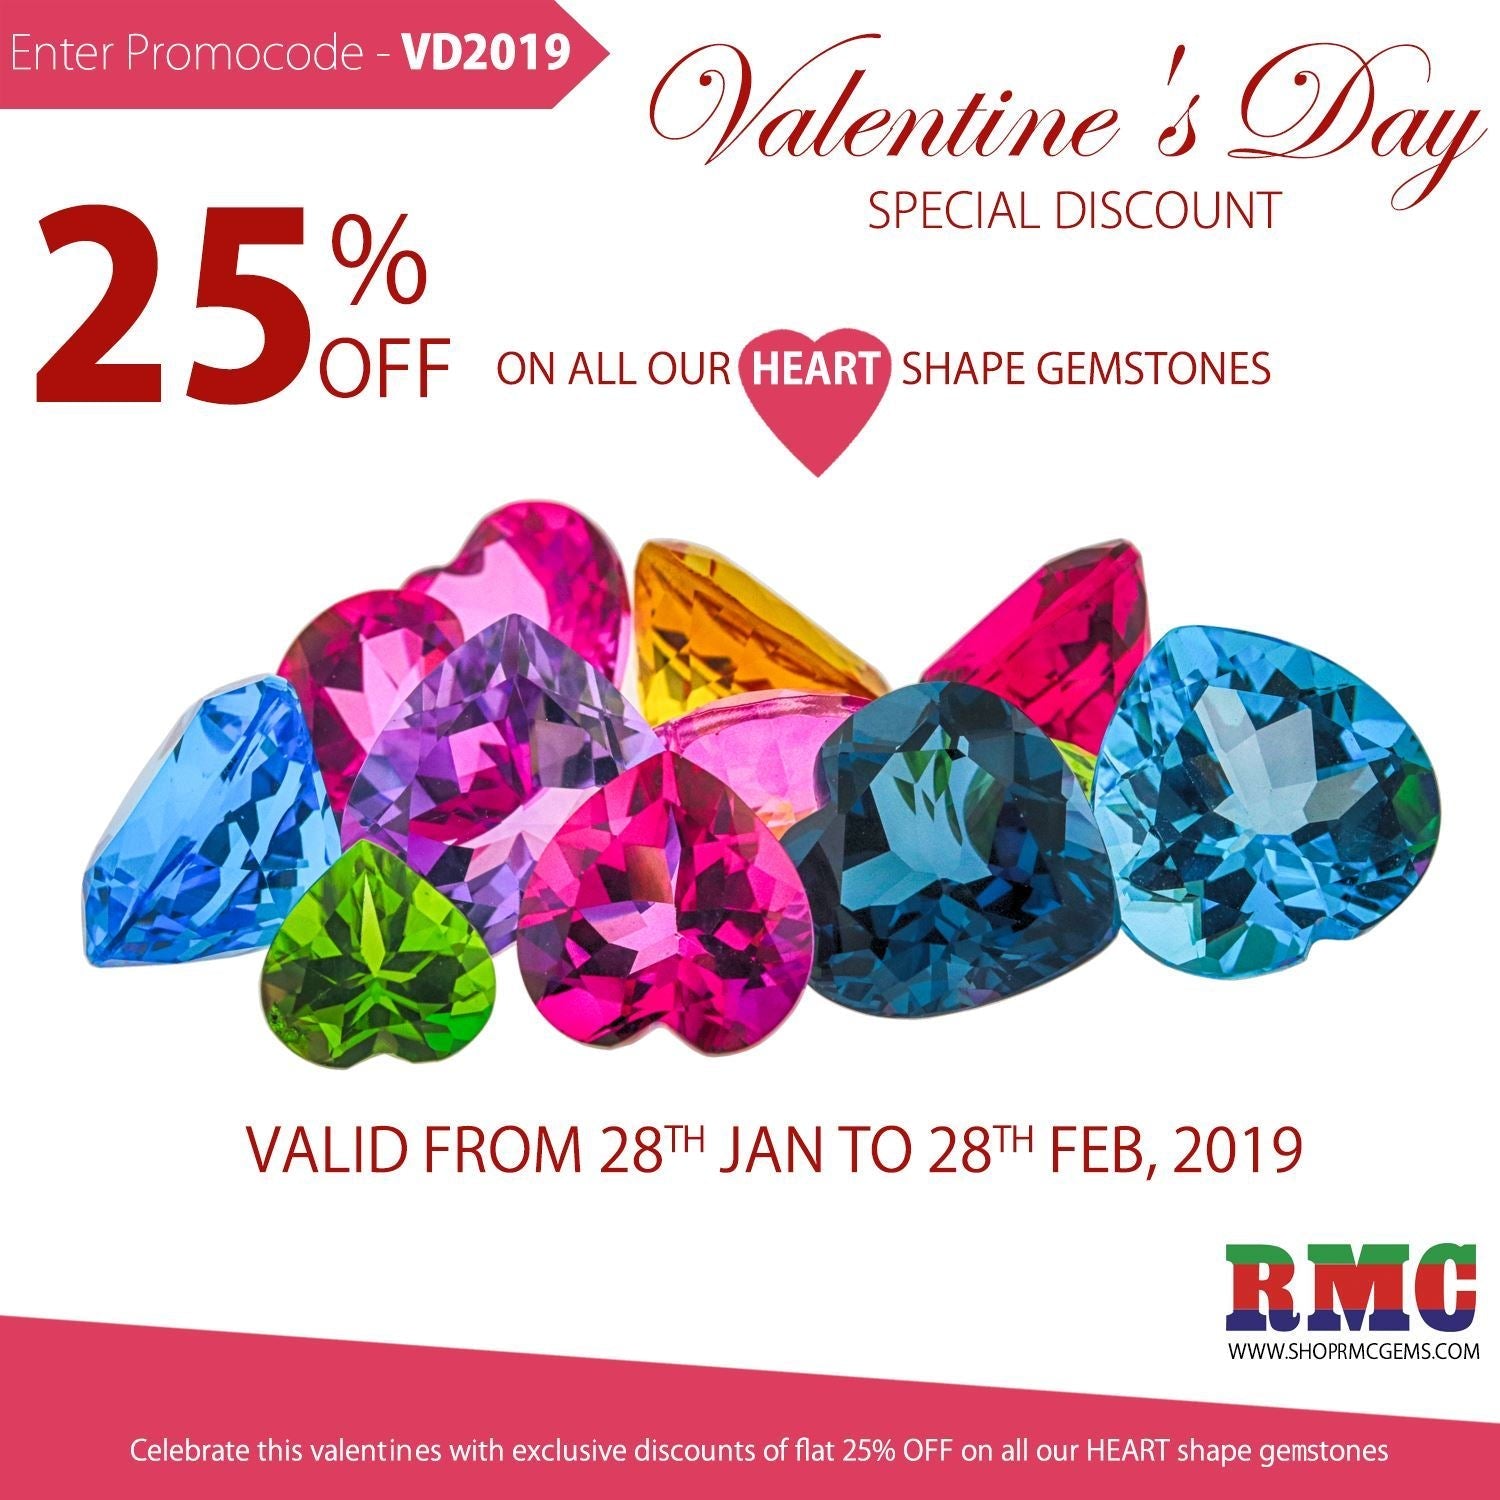 25% Off On All Our Heart Shape Gemstones On This Valentine's Day!